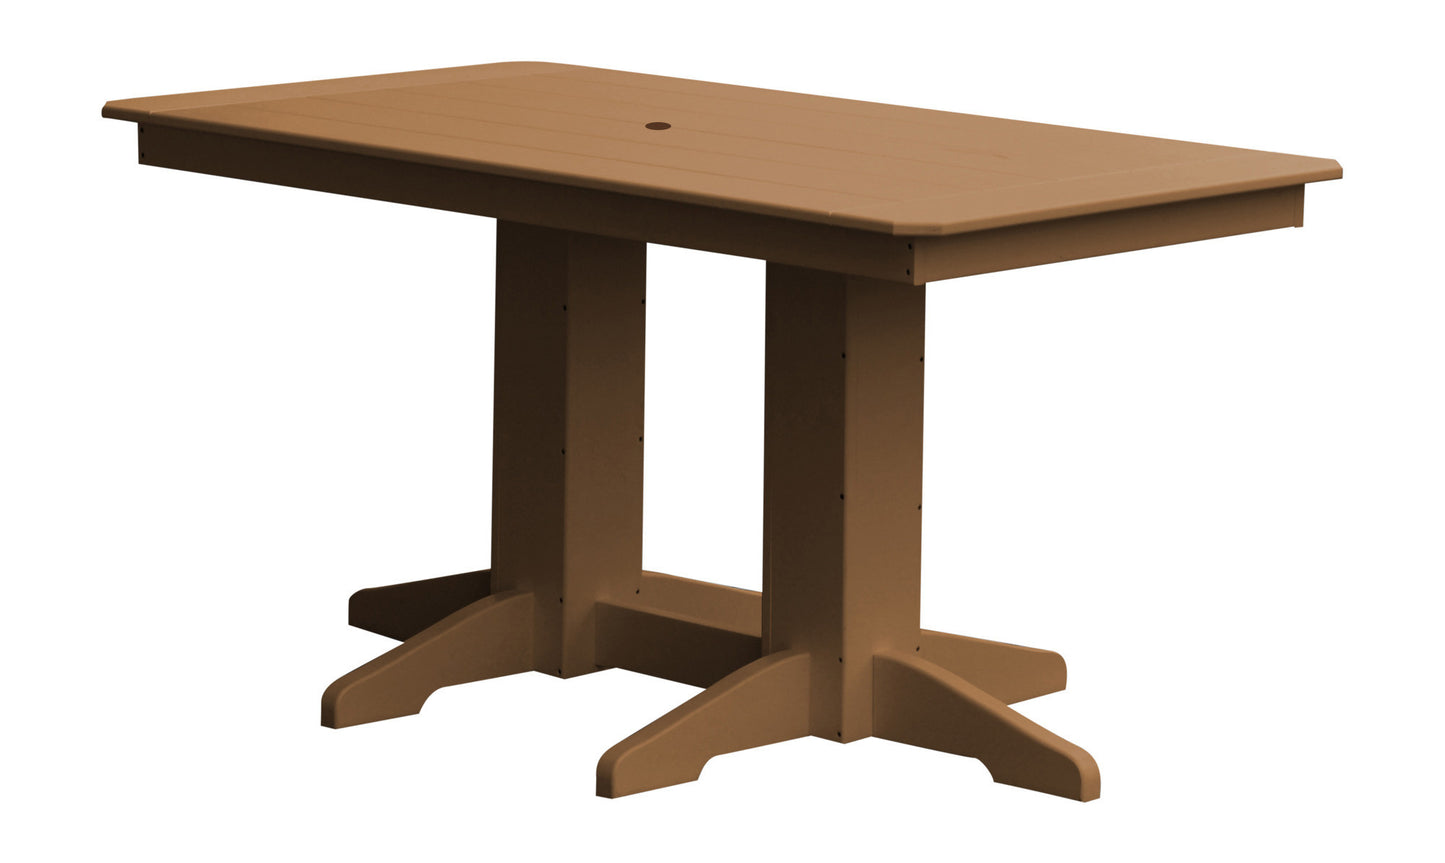 A&L Furniture Company Recycled Plastic 5' Dining Table - Cedar